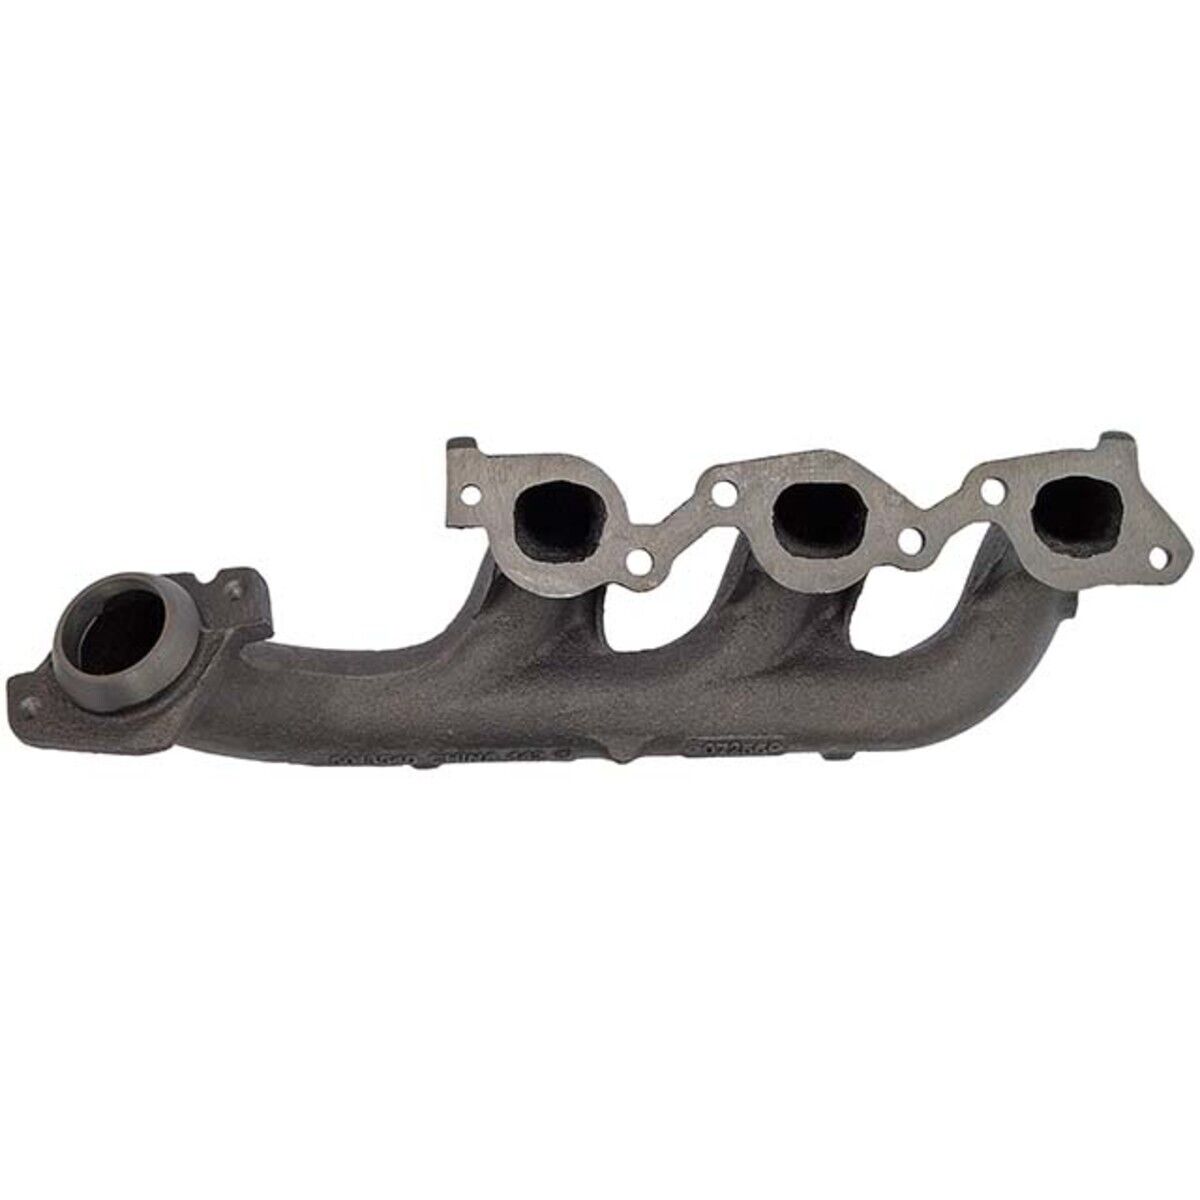 674-540 Dorman Kit Exhaust Manifold Front for Chevy Olds Le Sabre NINETY EIGHT